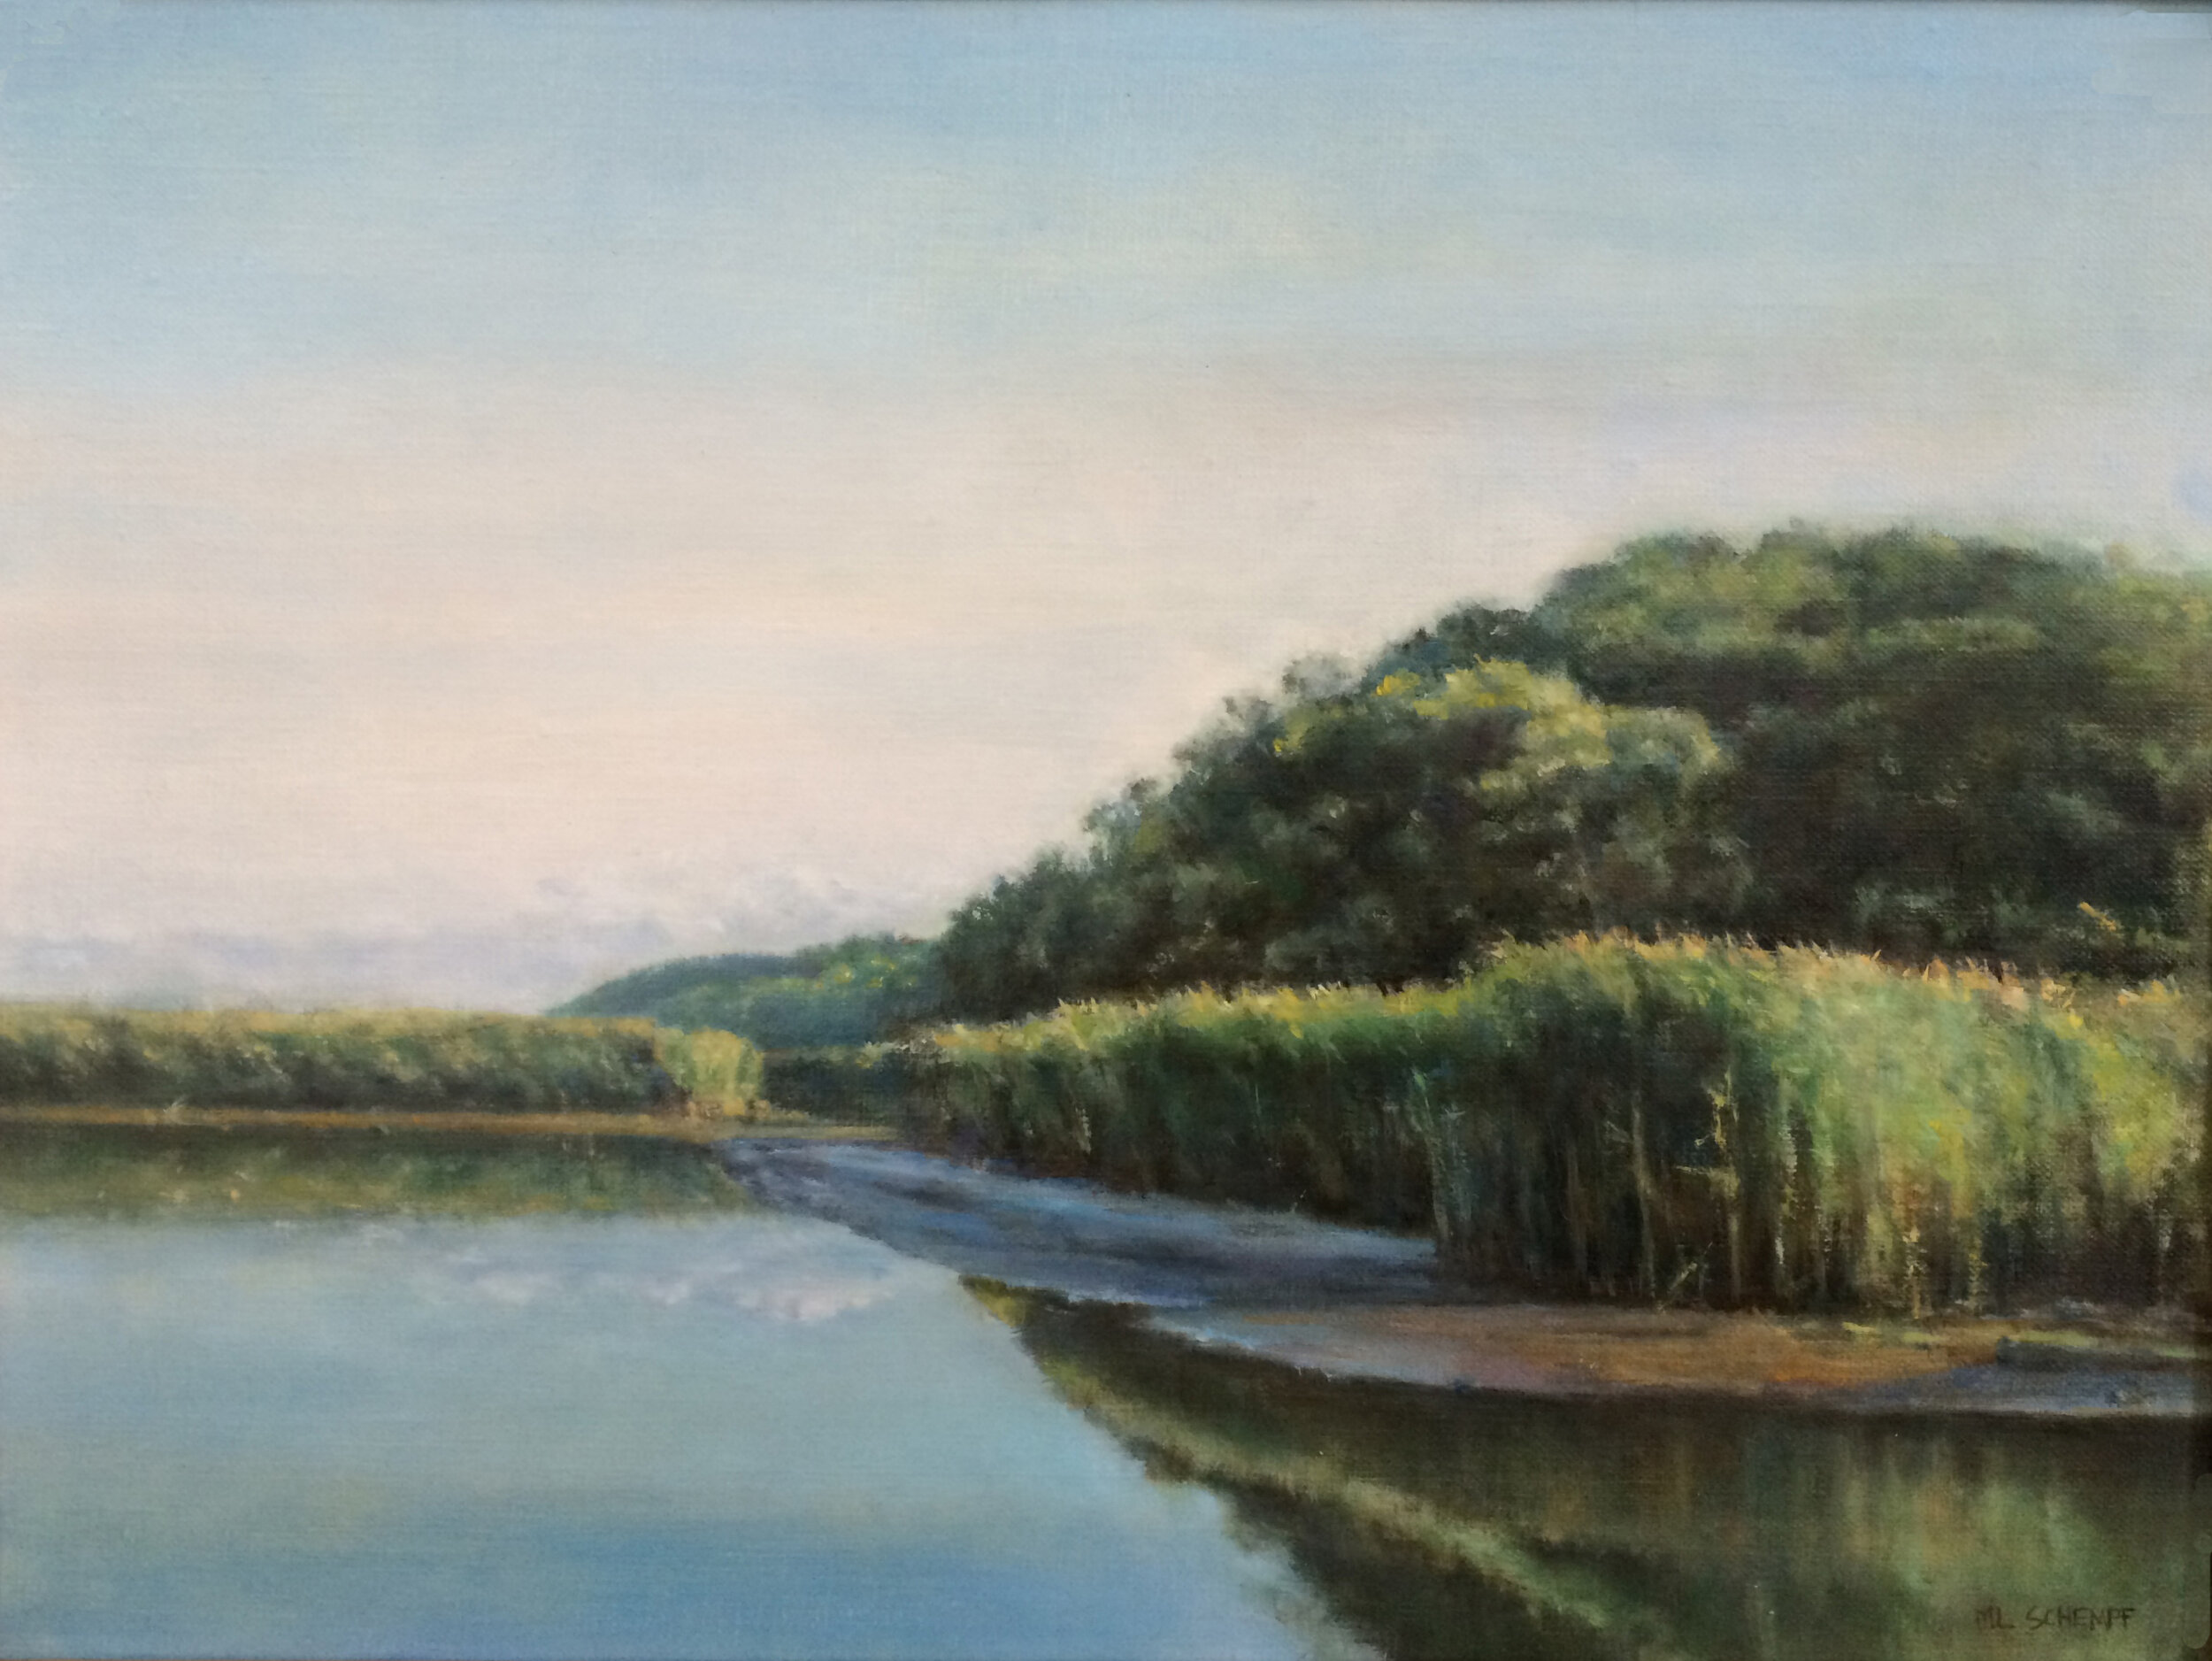  Mary Lou Schempf  Piermont Marsh, 12” x”24, oil on linen  (available)  